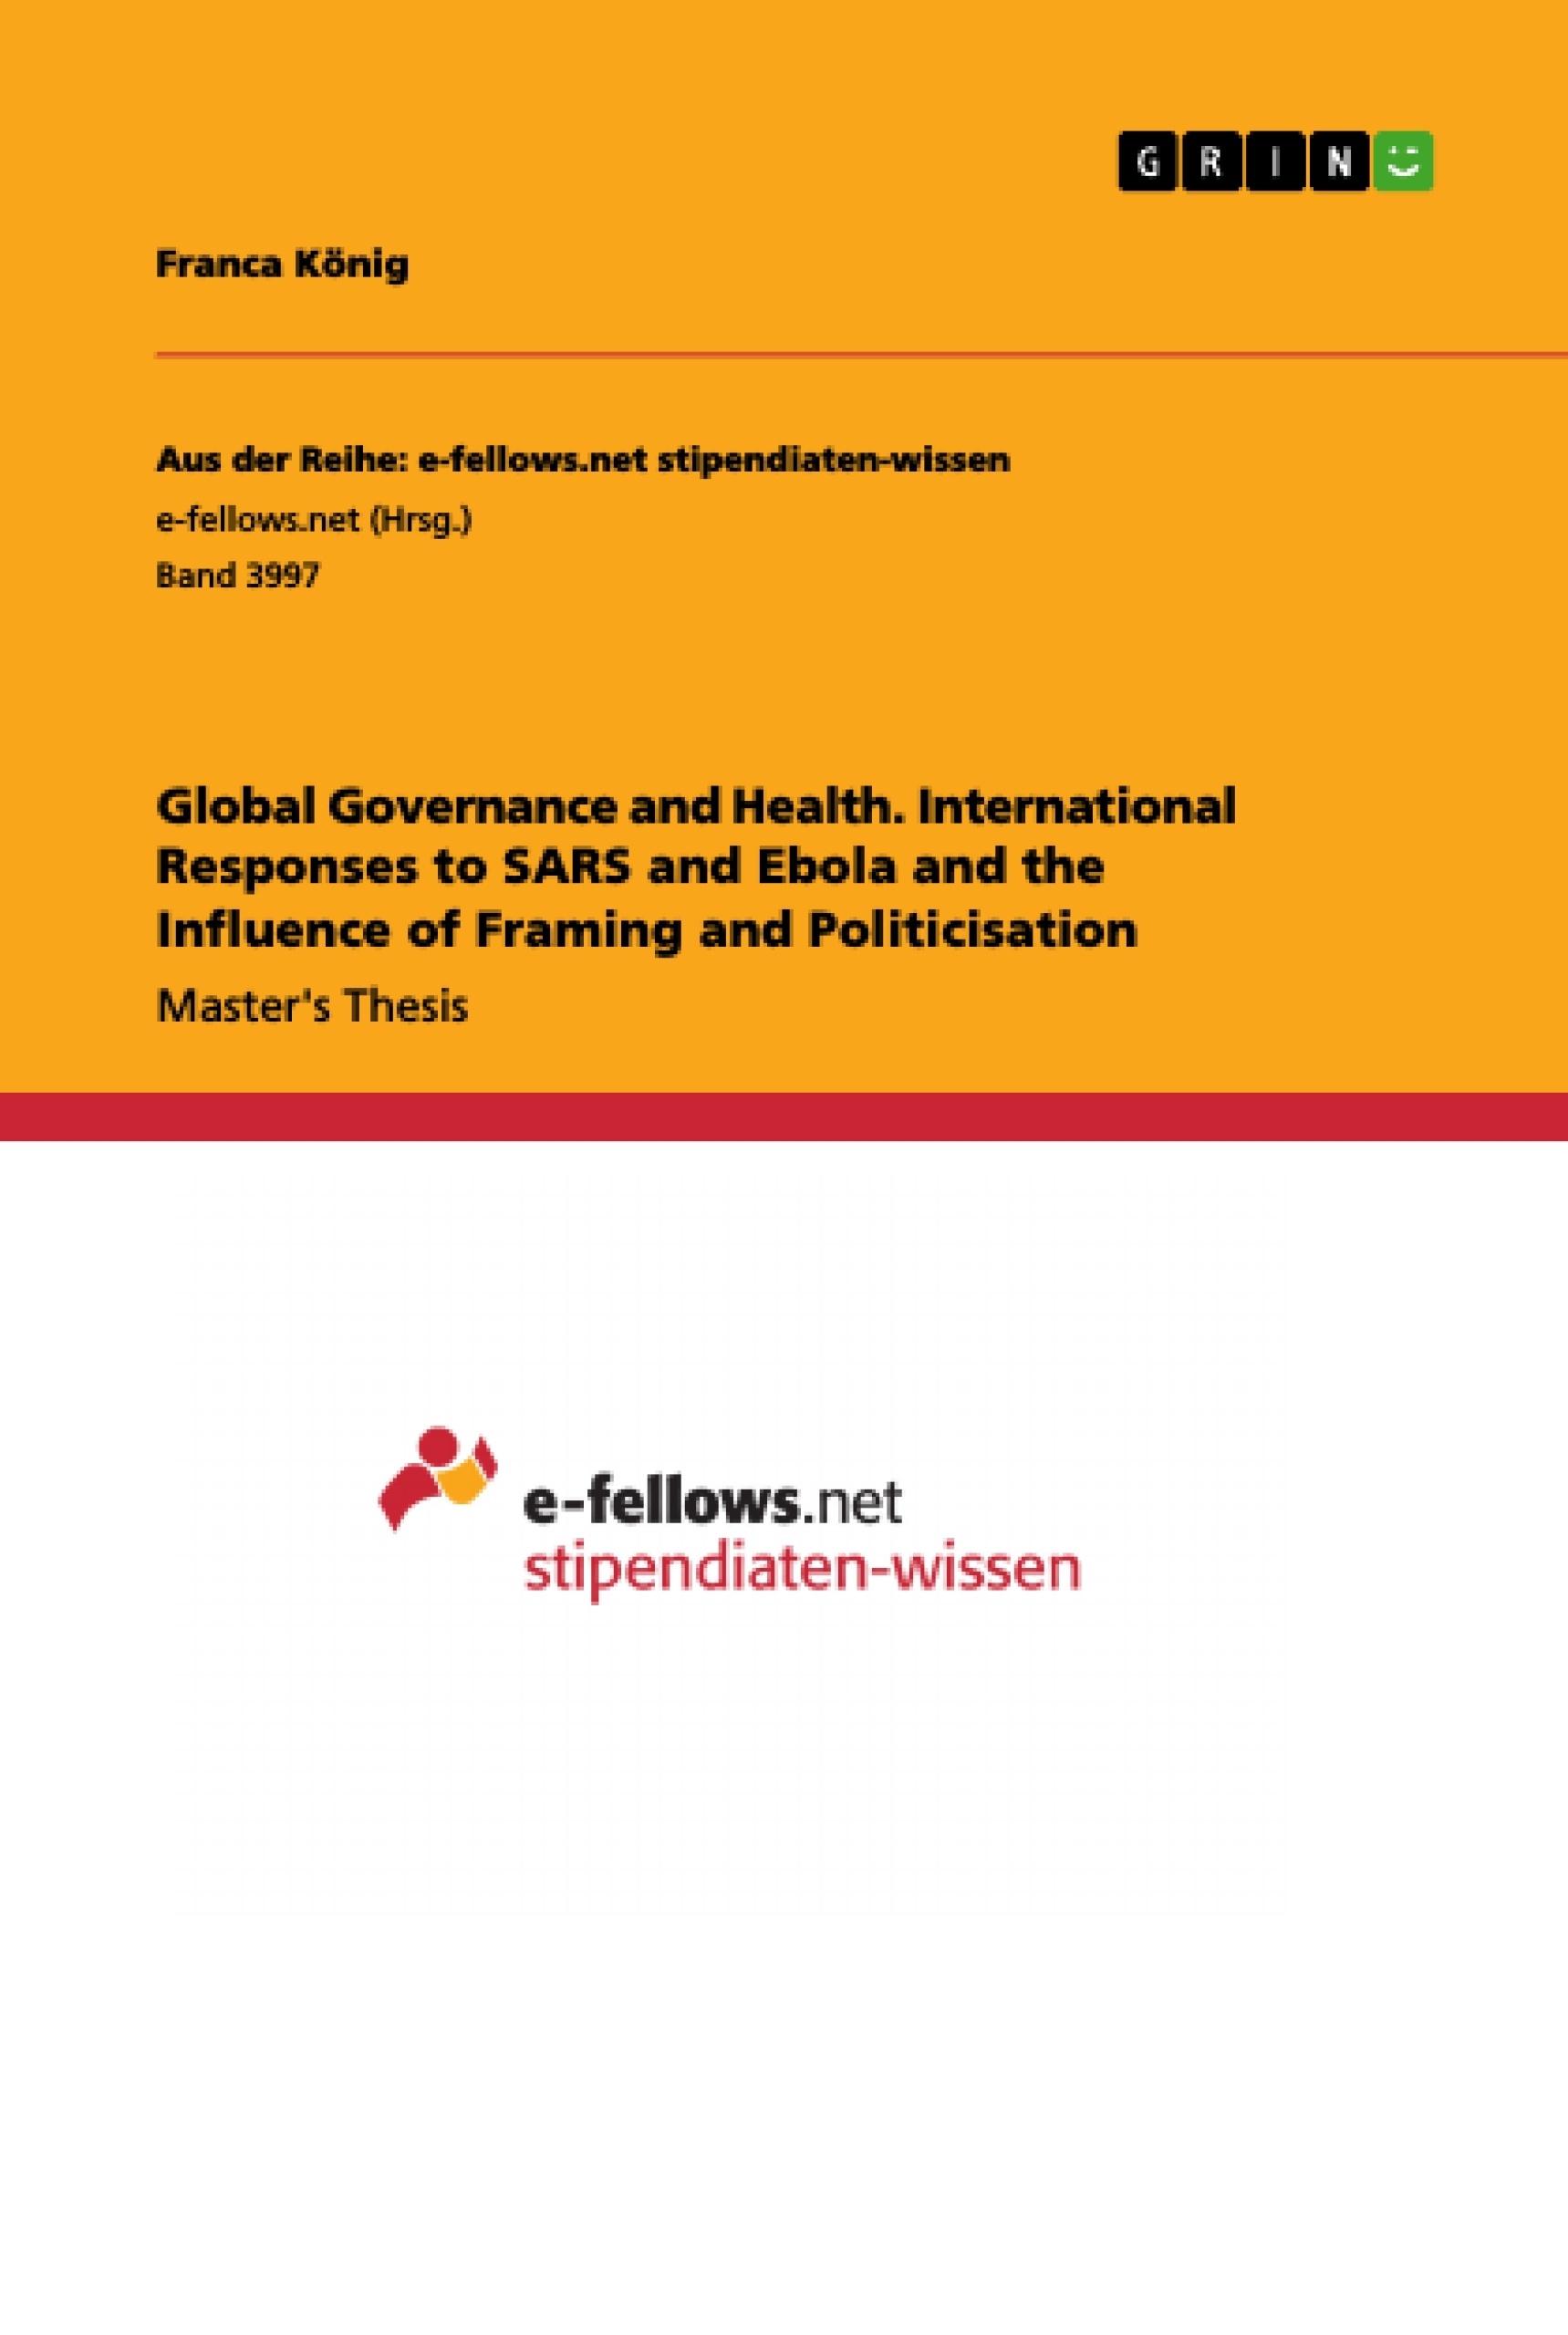 Title: Global Governance and Health. International Responses to SARS and Ebola and the Influence of Framing and Politicisation